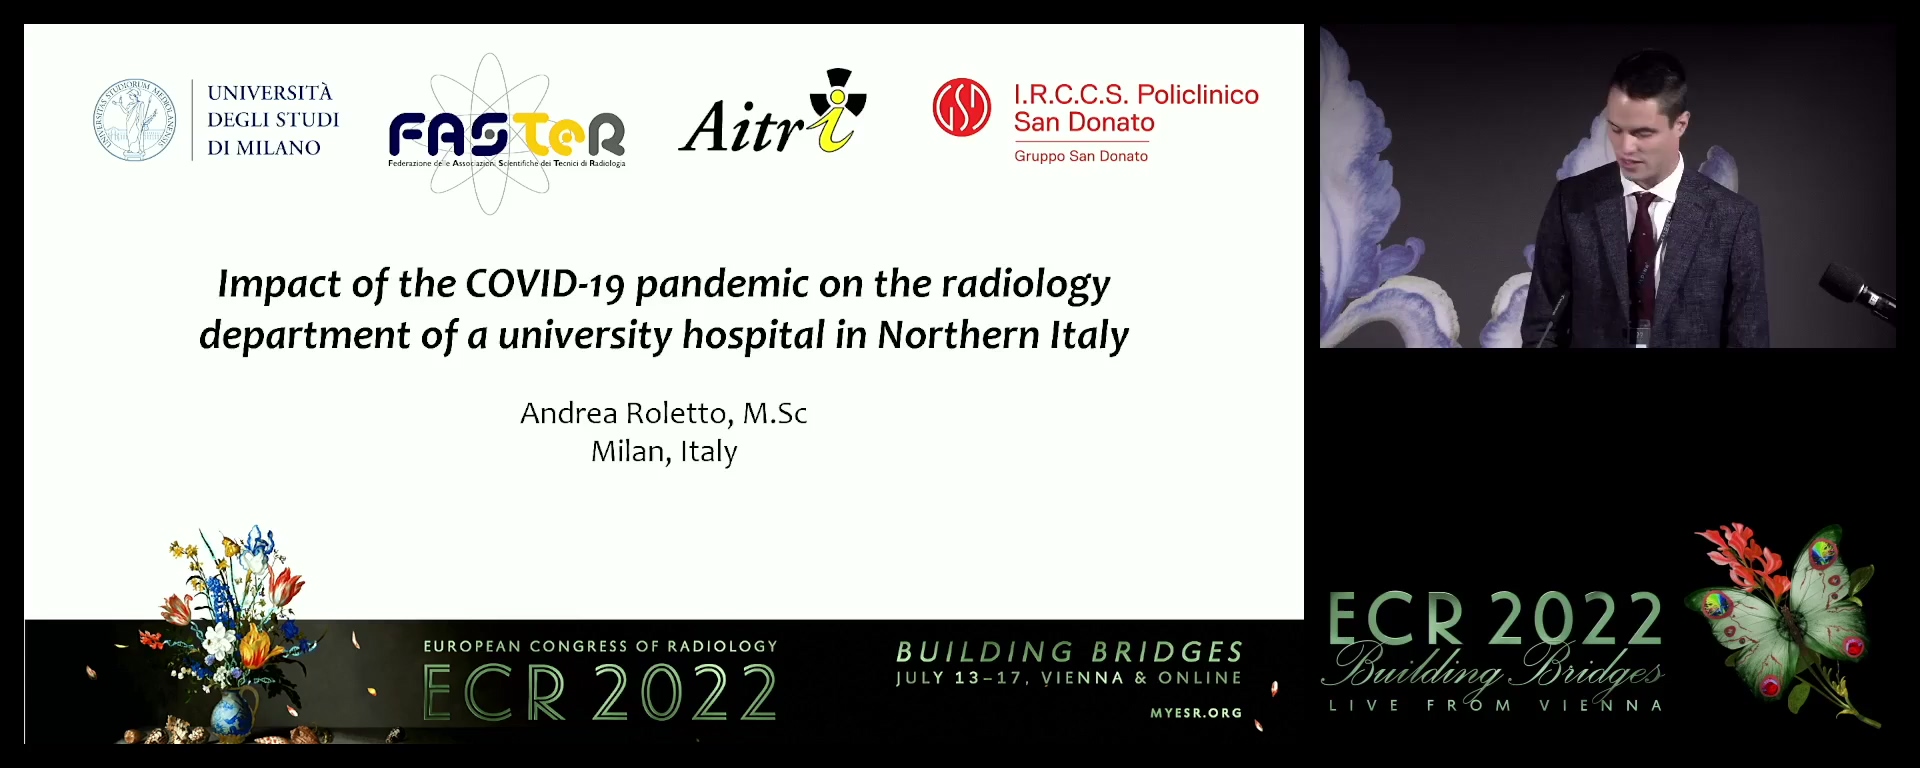 Impact of the COVID-19 pandemic on the radiology department of a university hospital in Northern Italy - Andrea Roletto, Milan / IT